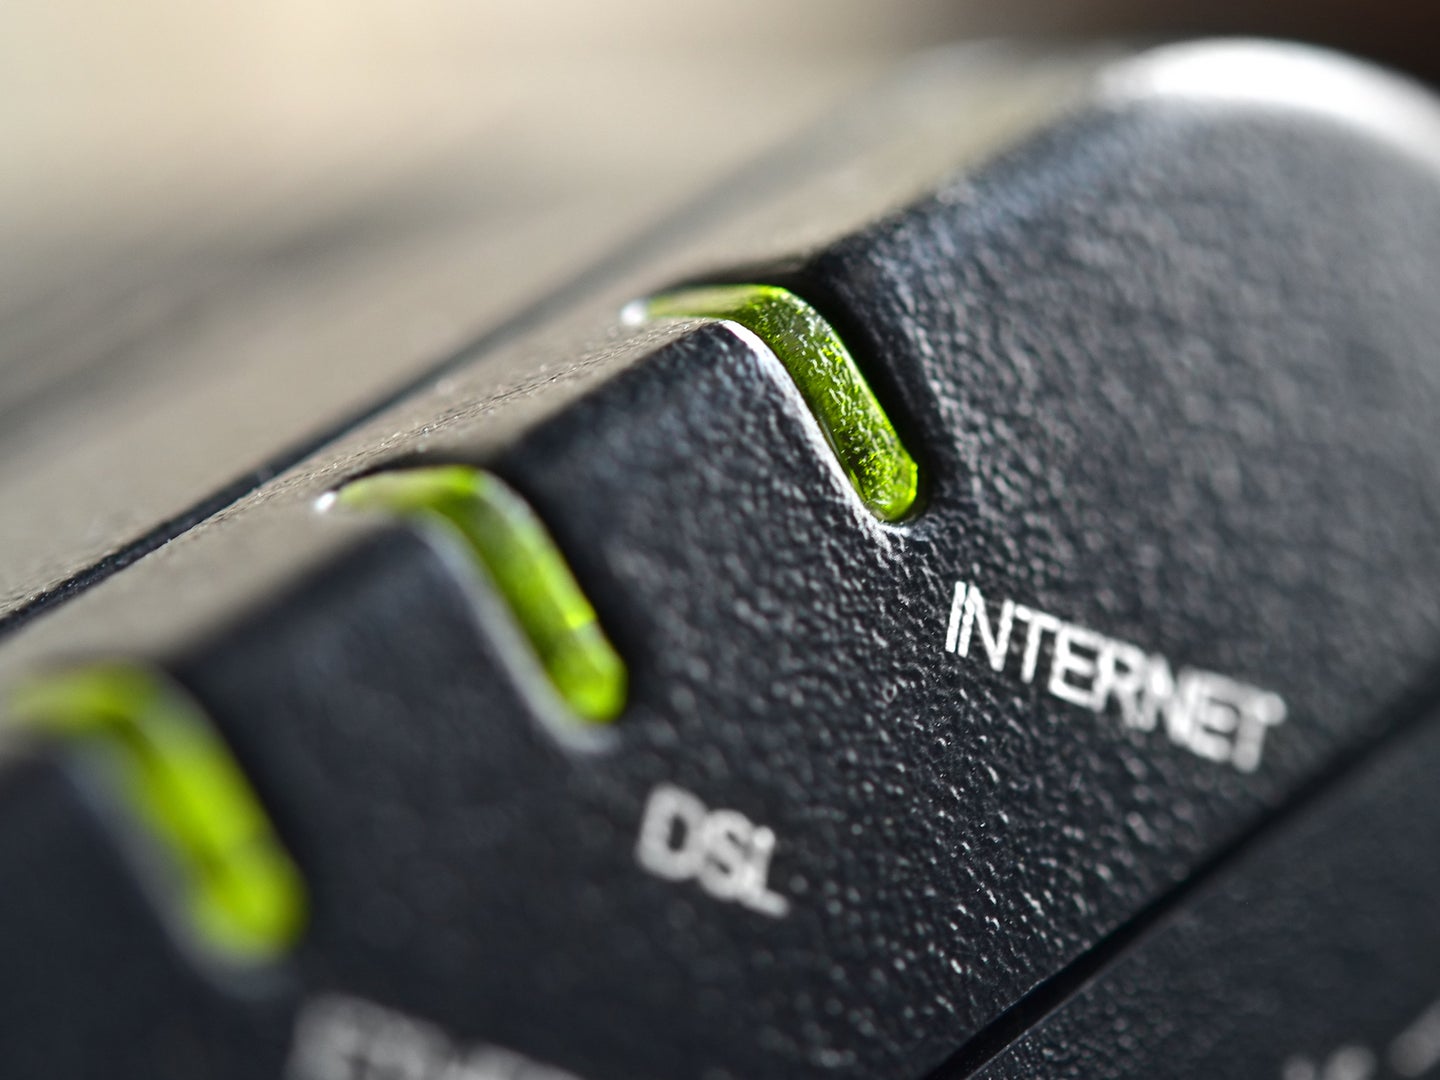 Closeup of black internet router showing Internet and DSL lights